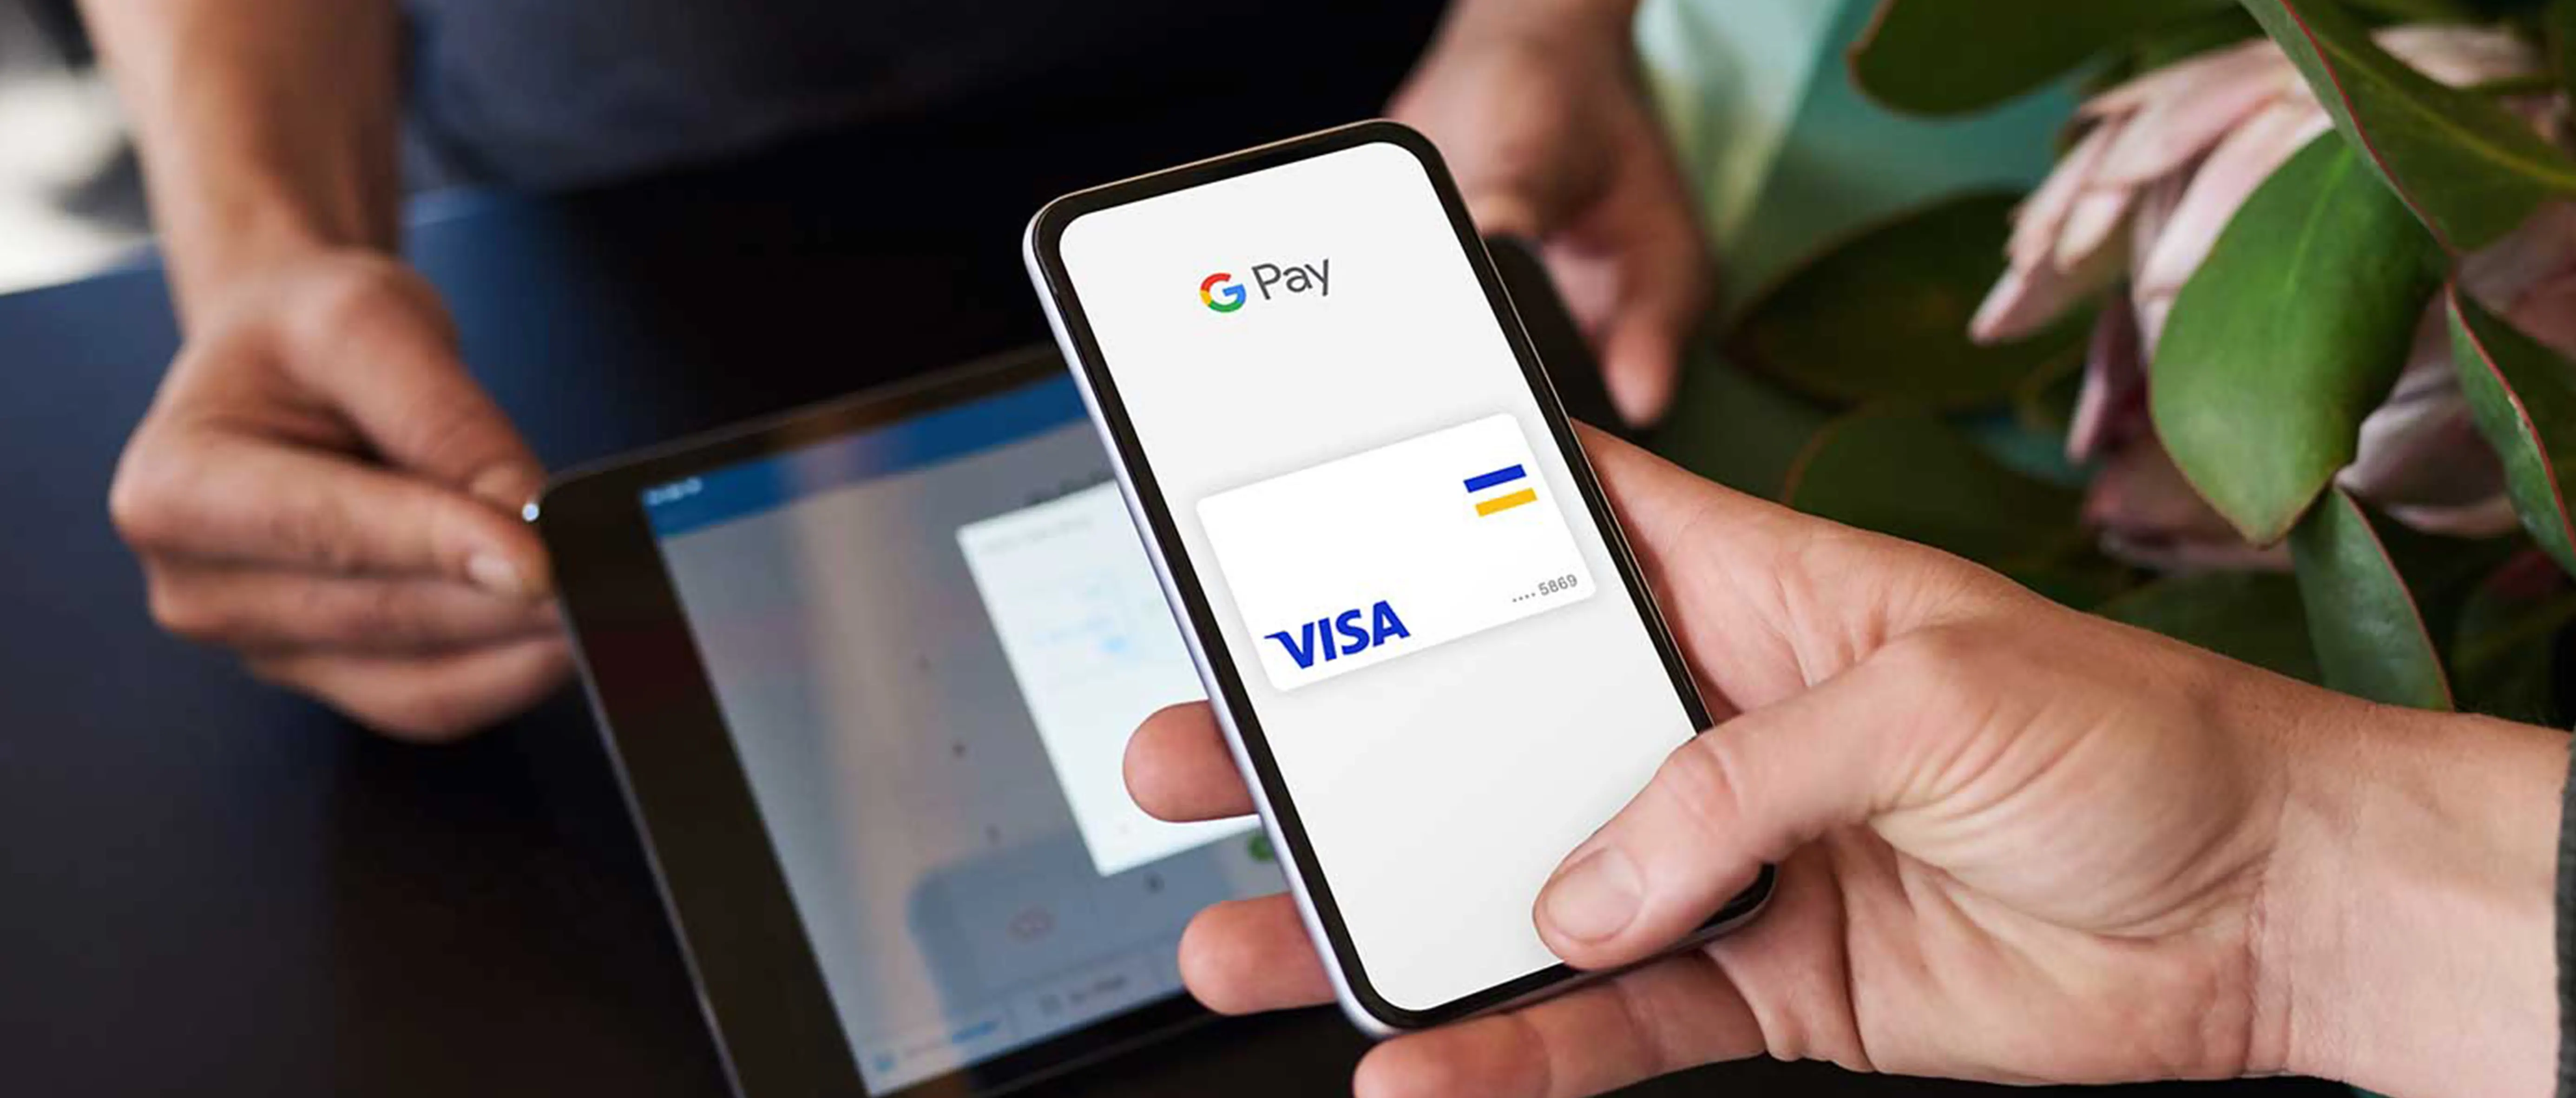 Google Pay Overview